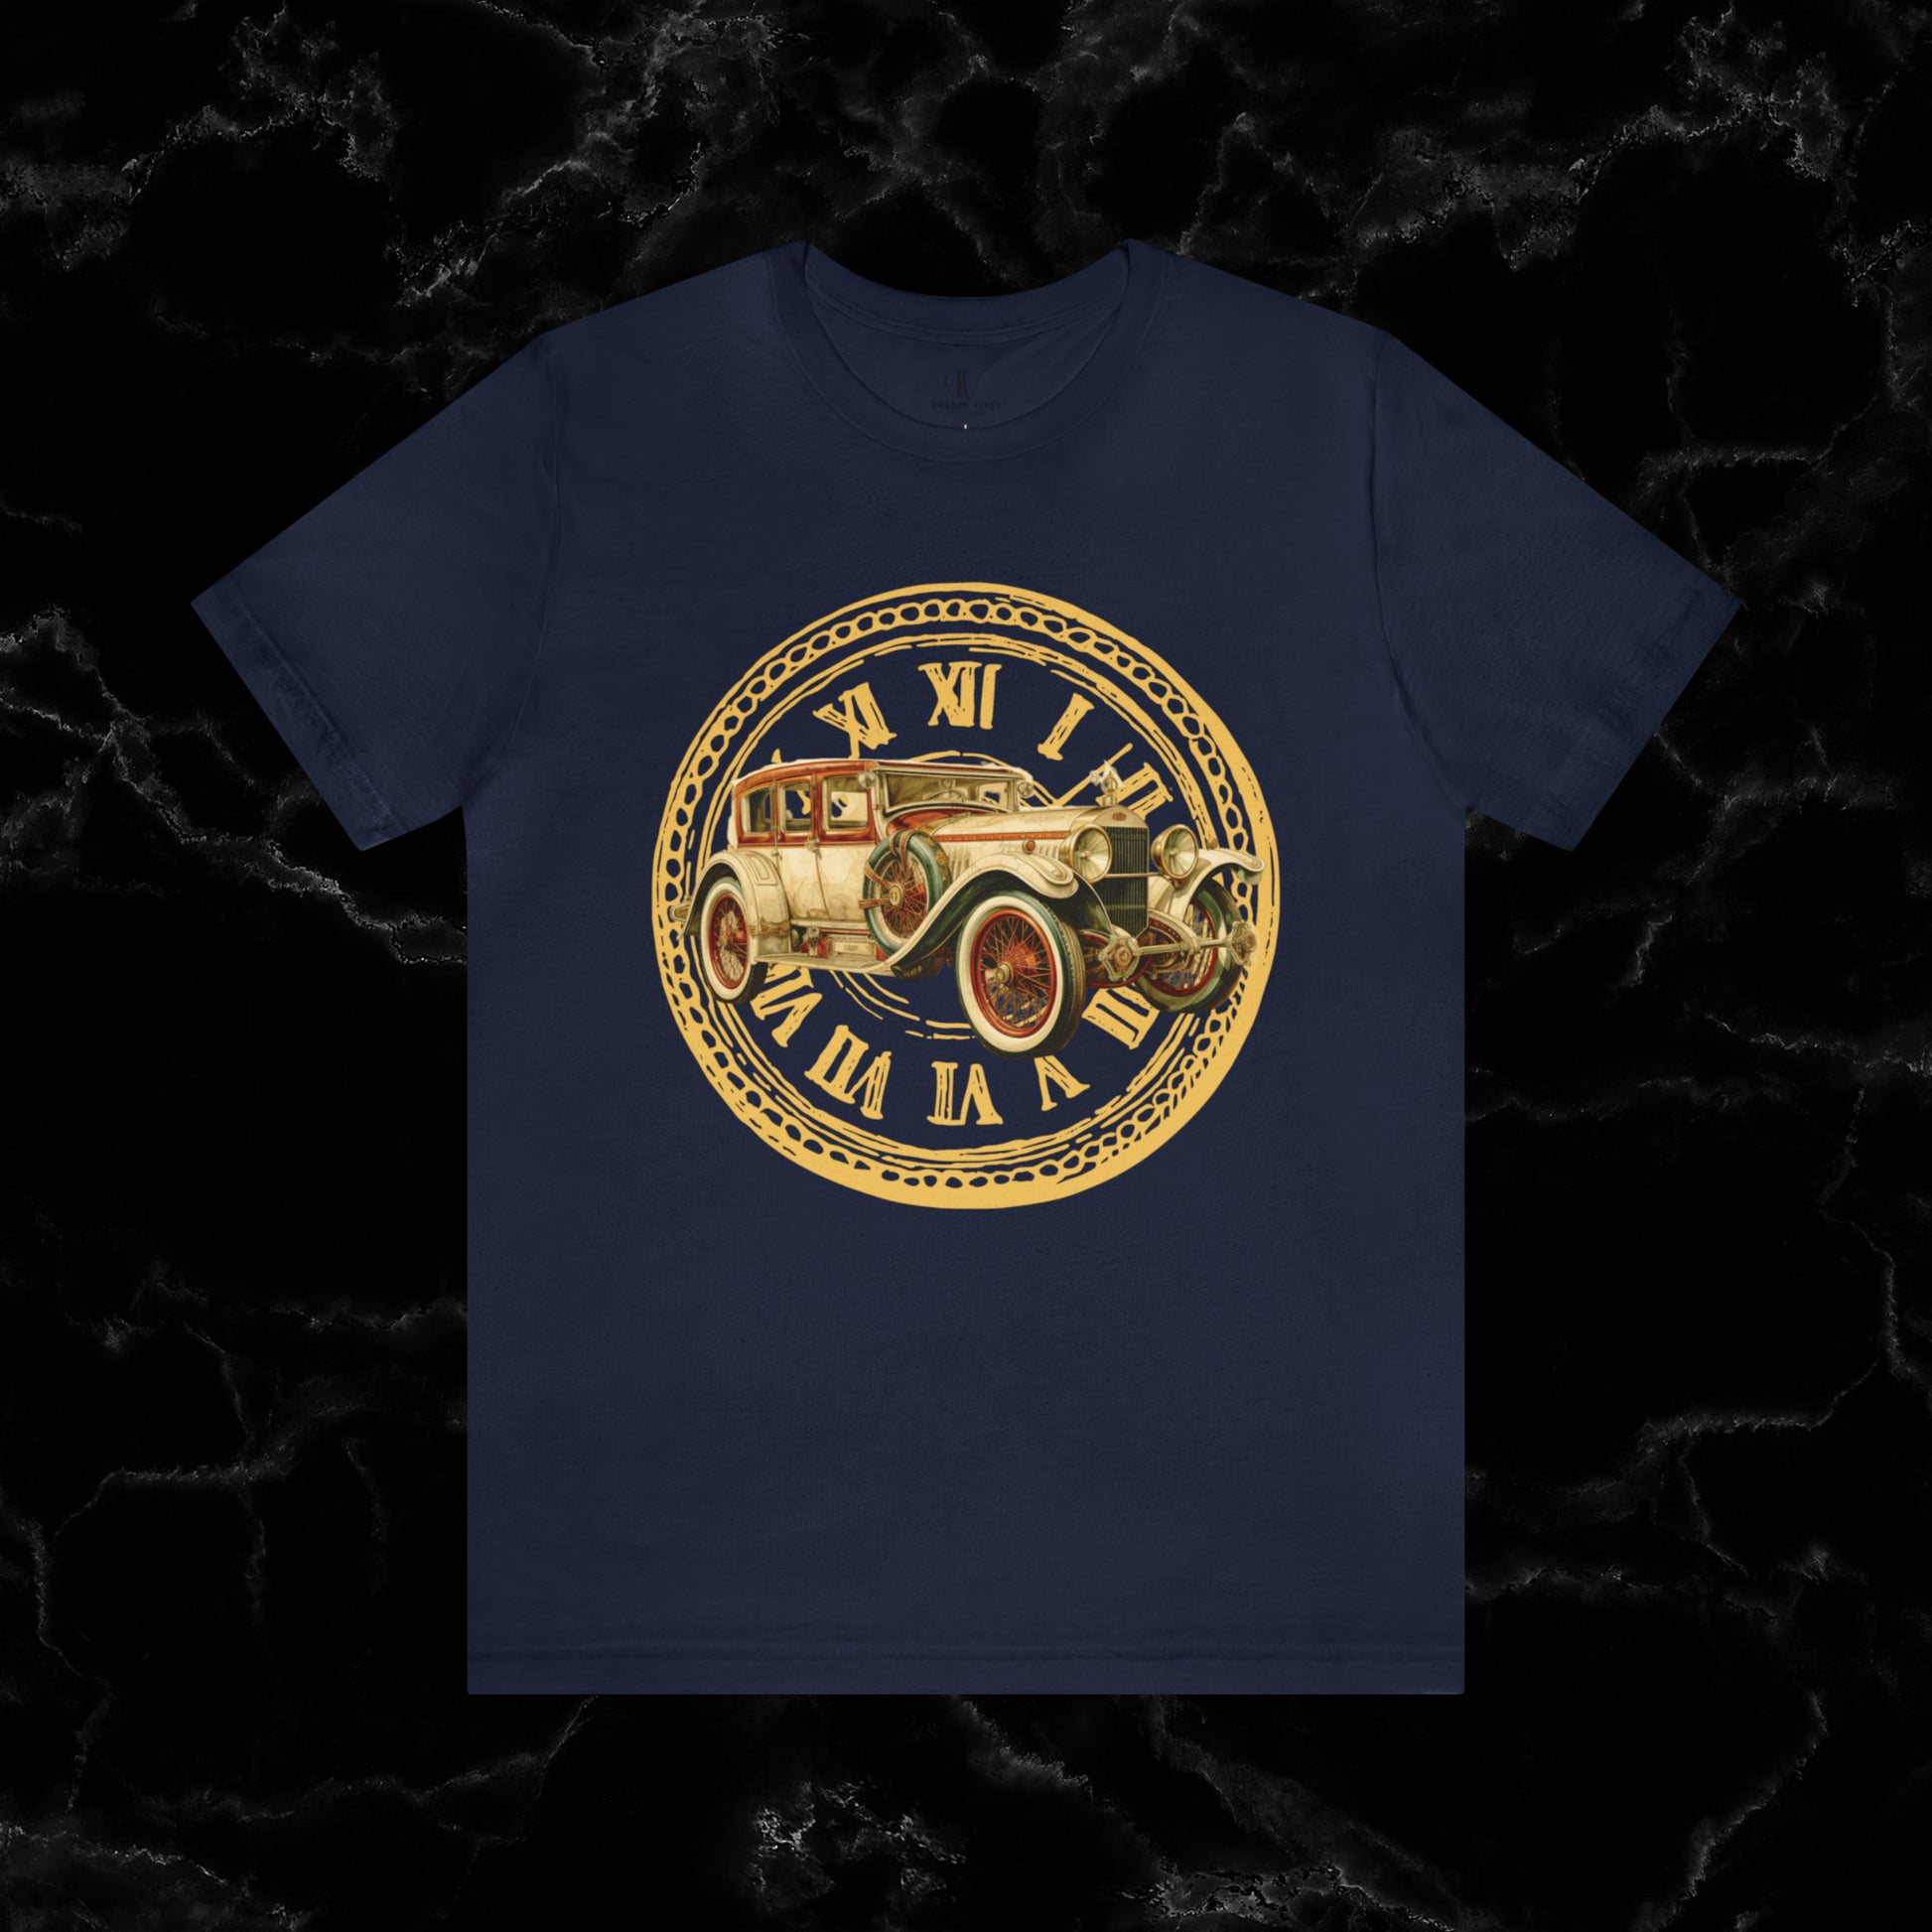 Vintage Car Enthusiast T-Shirt with Classic Wheels and Timeless Appeal T-Shirt Navy S 